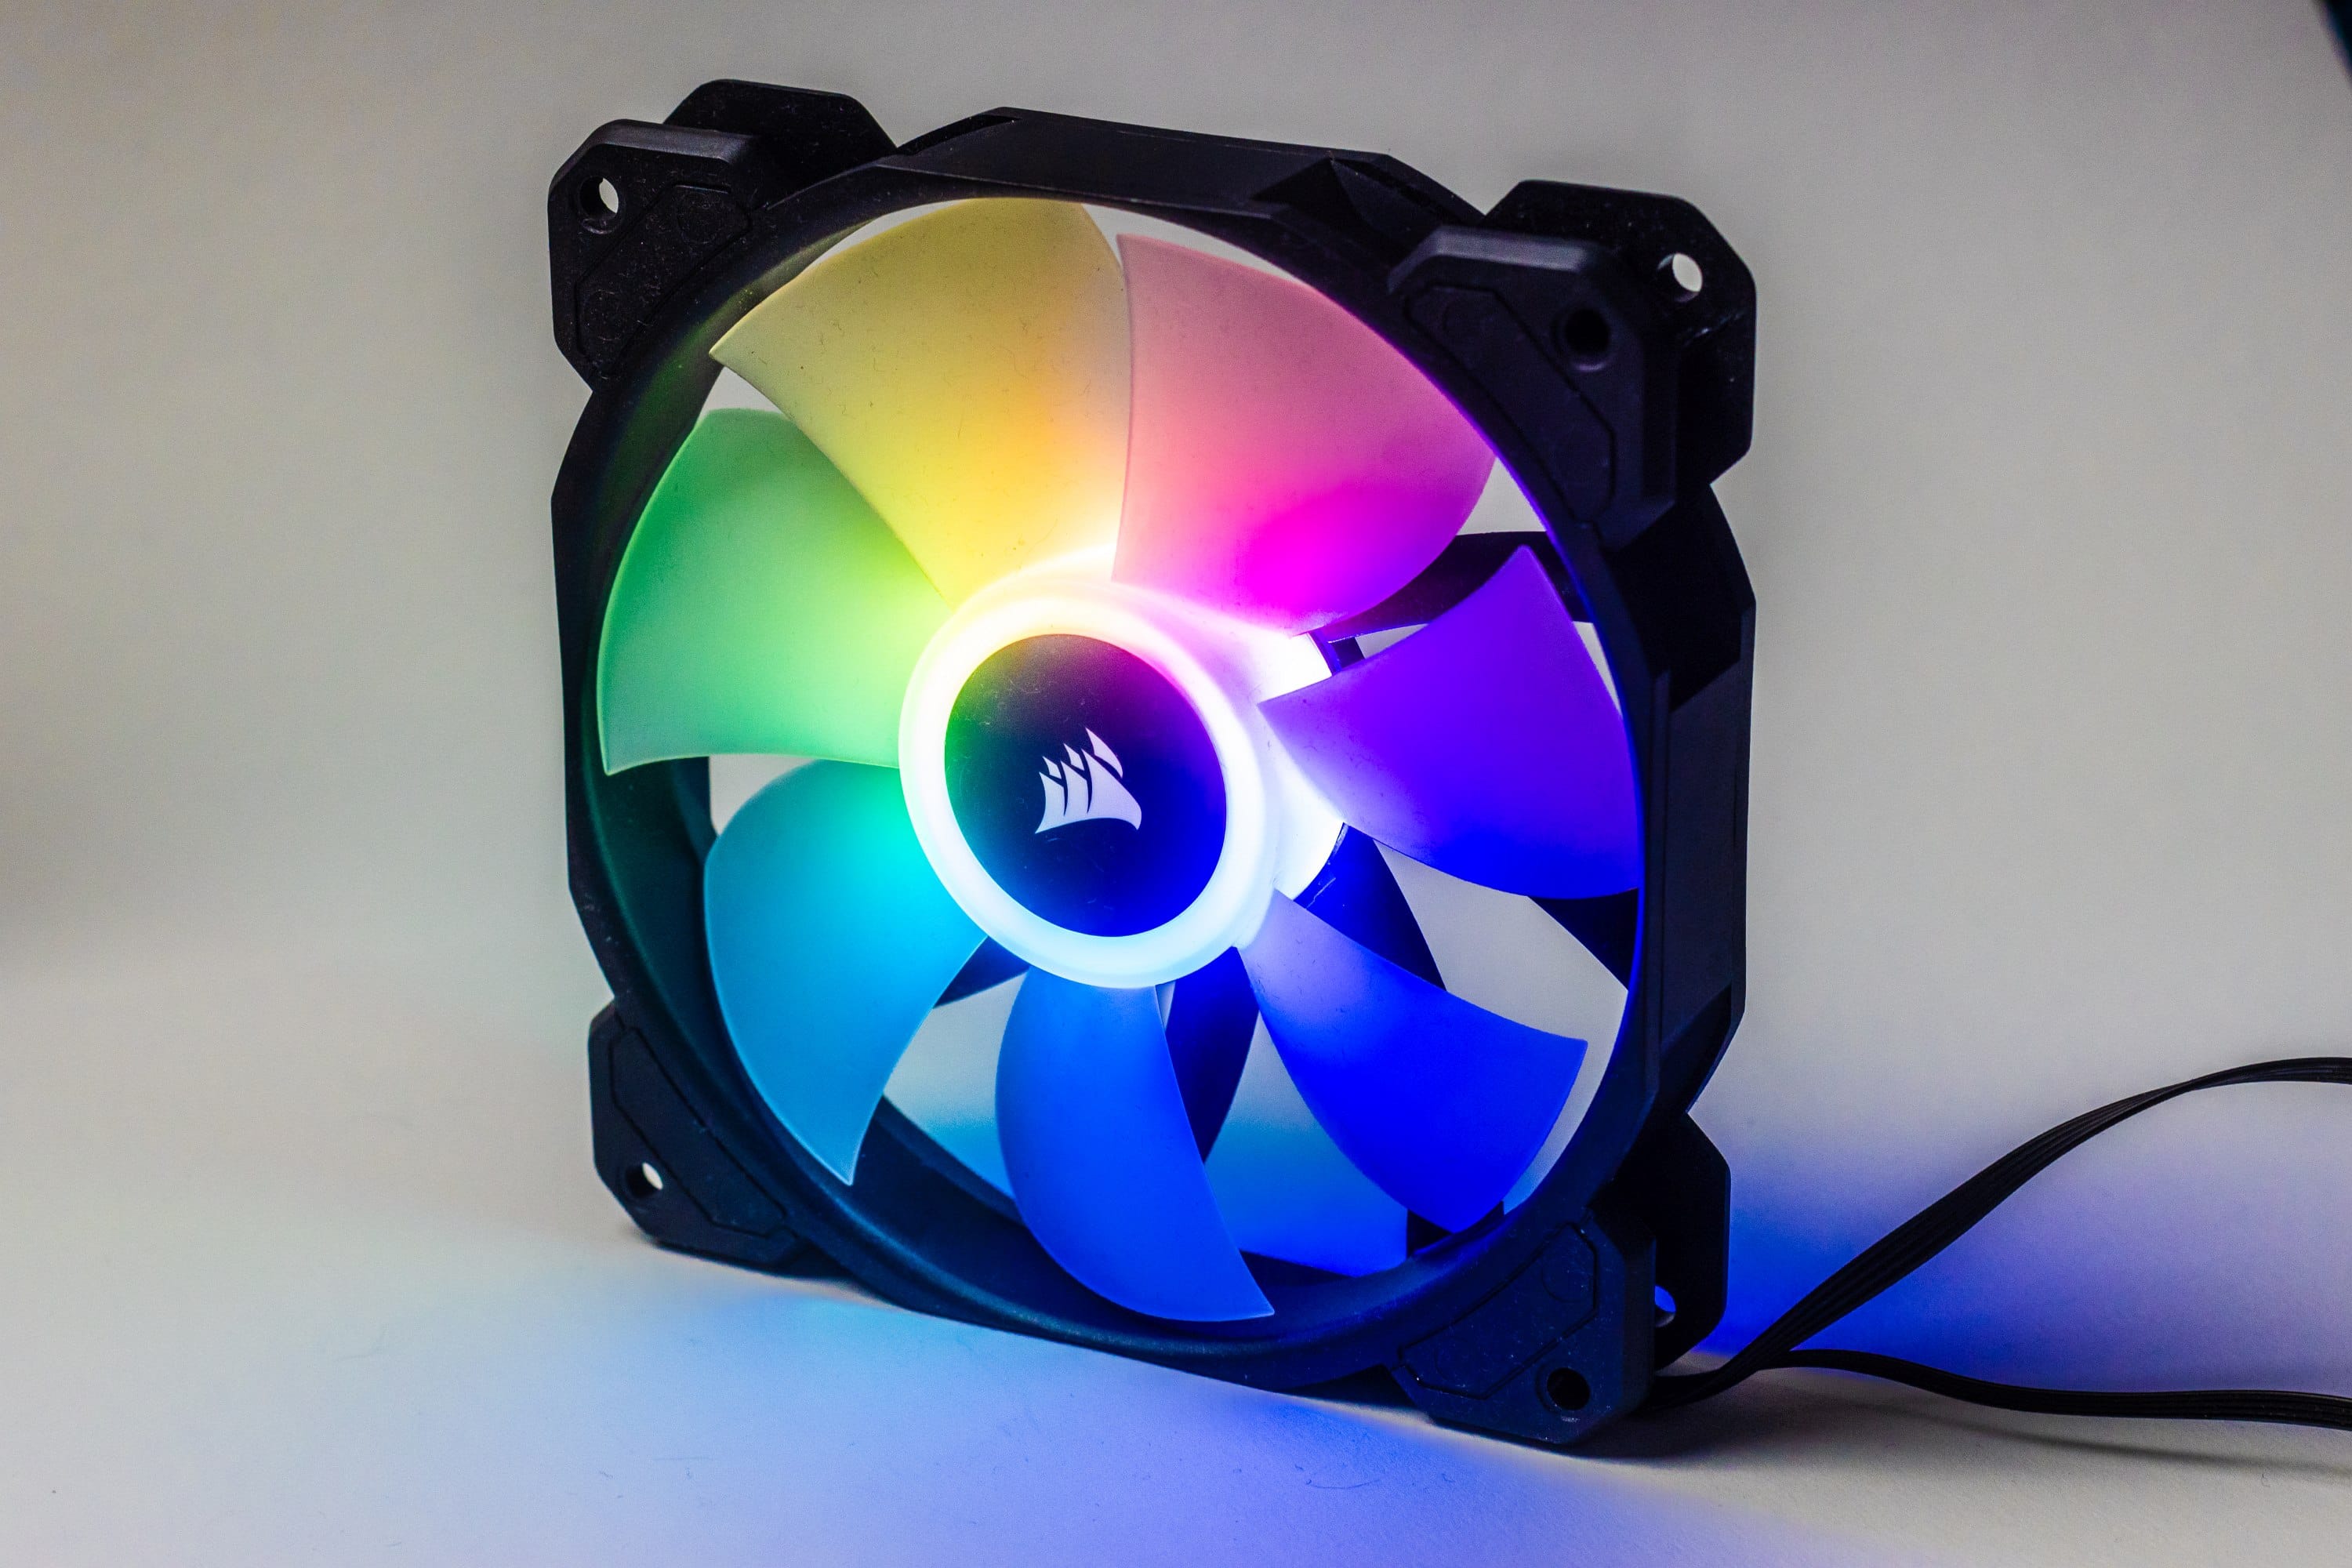 Corsair SP RGB Elite fan the test pressure they put on! 